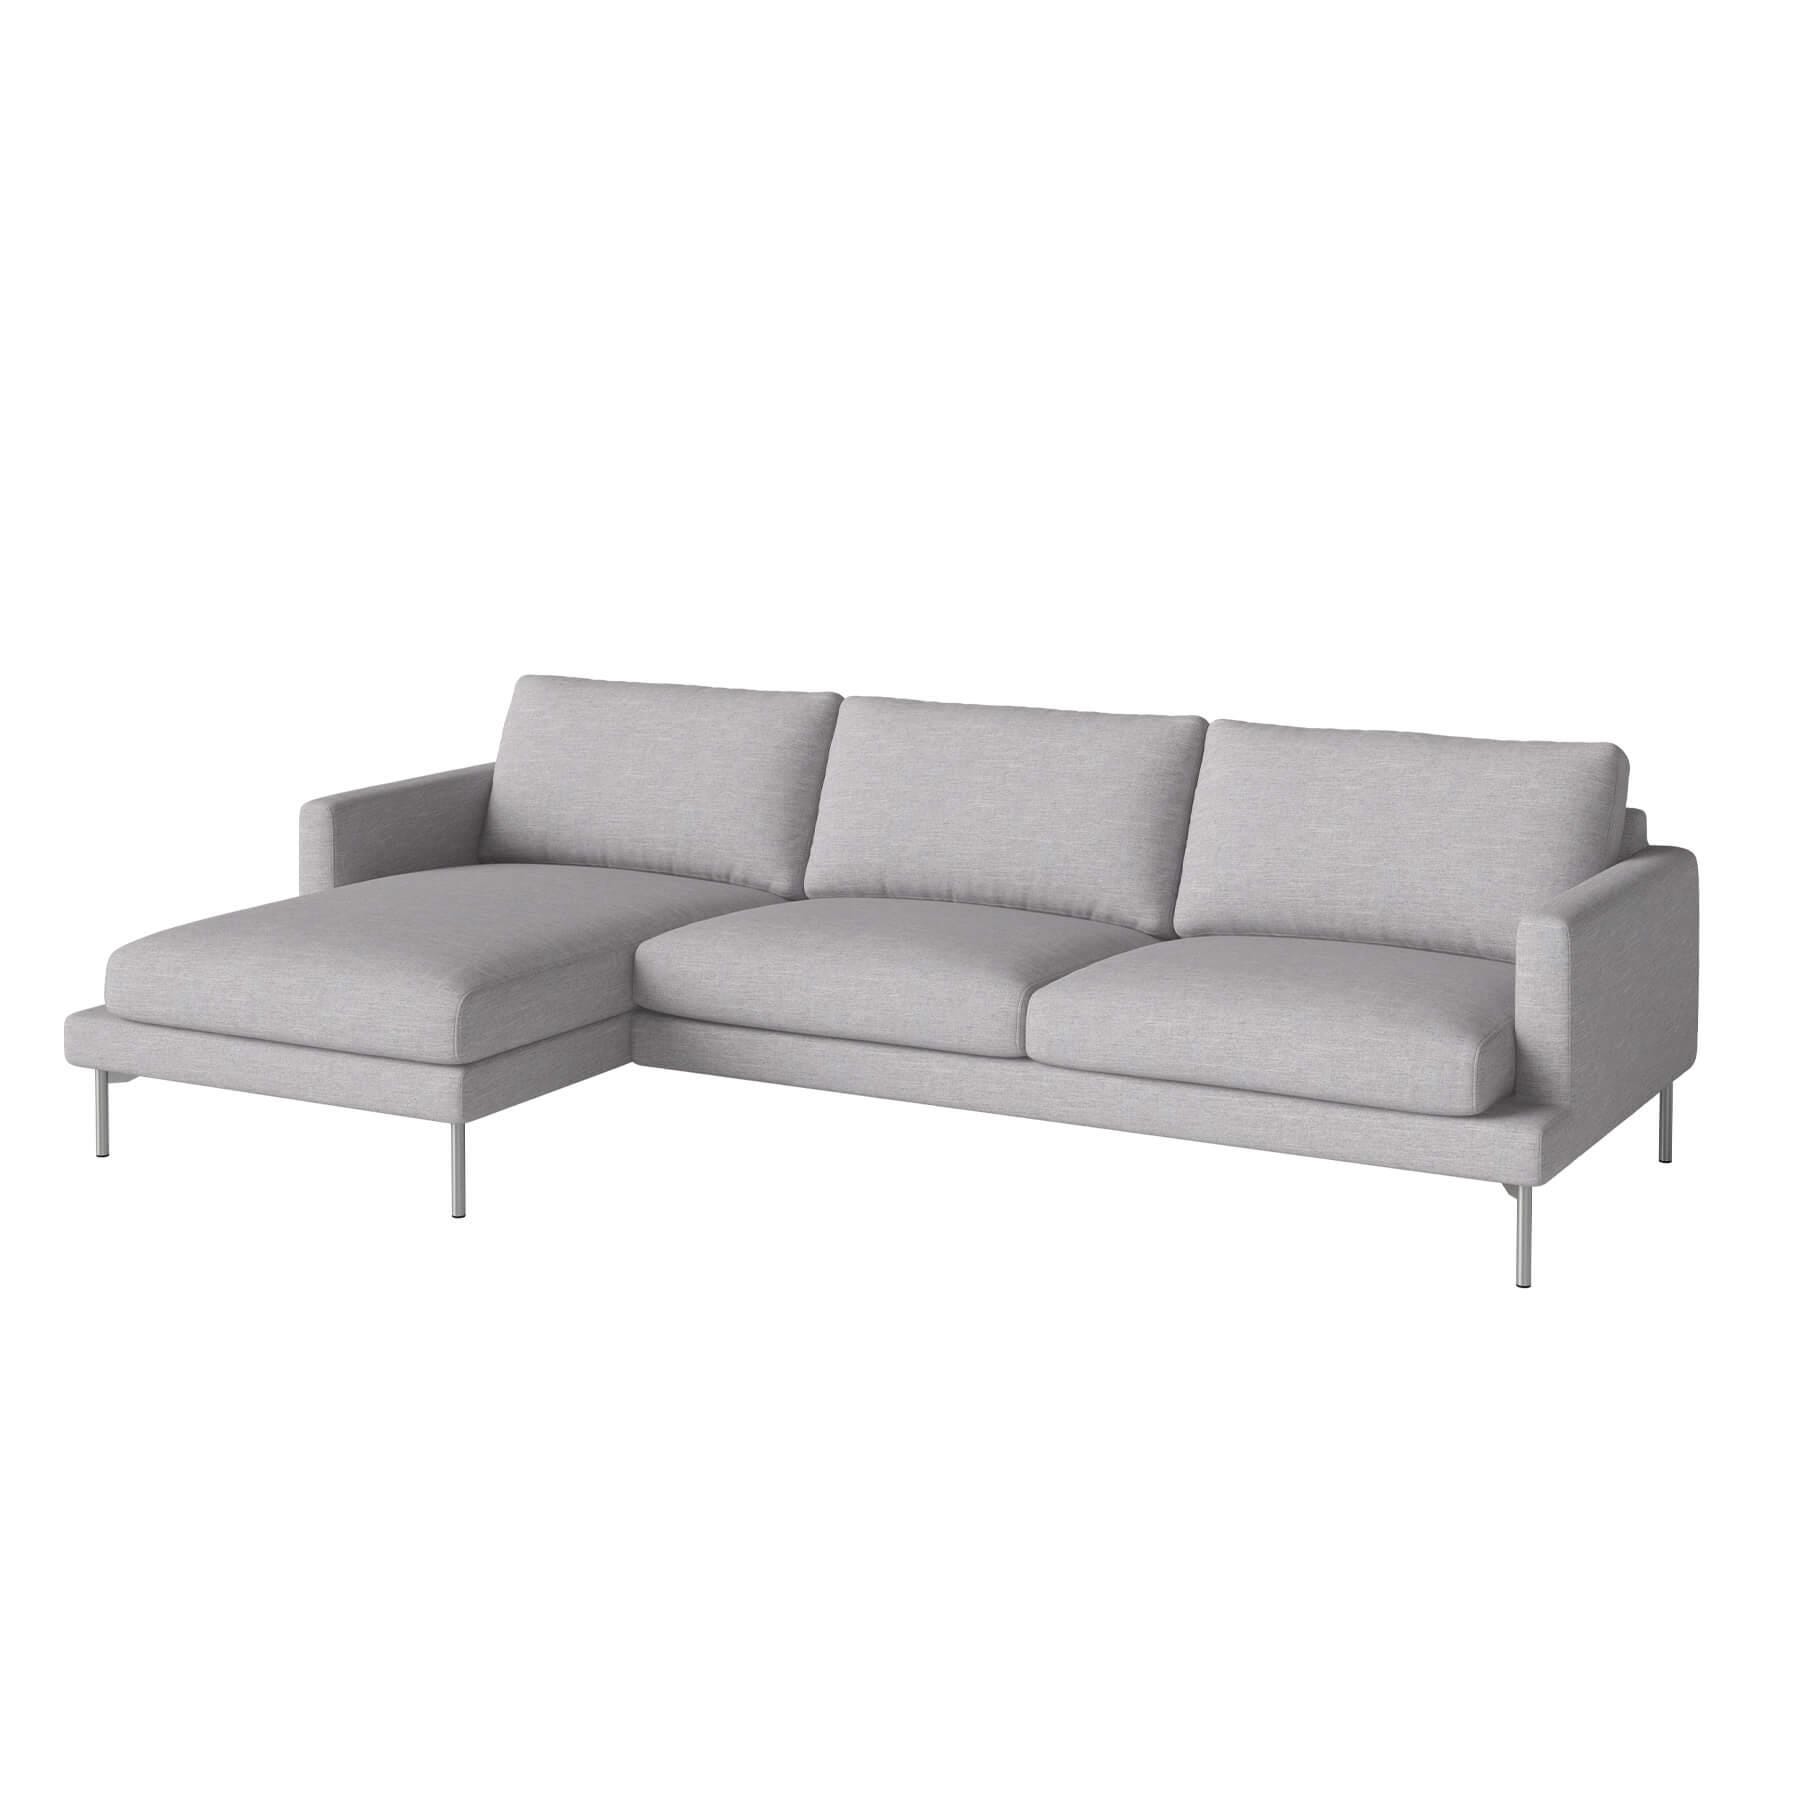 Bolia Veneda Sofa 35 Seater Sofa With Chaise Longue Brushed Steel London Dust Green Left Grey Designer Furniture From Holloways Of Ludlow